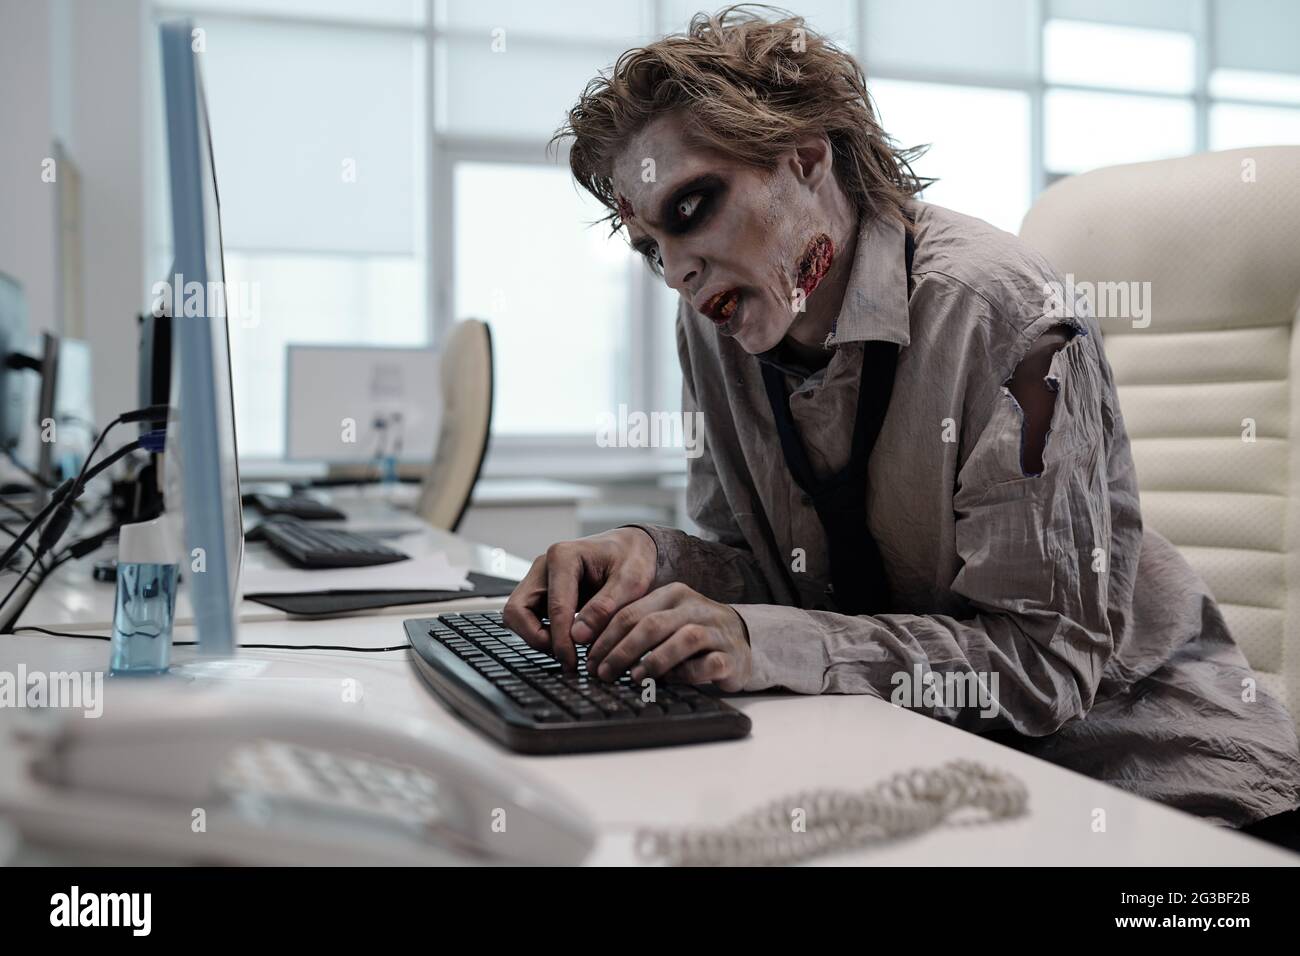 Ugly man with zombie makeup working with computer in office Stock Photo